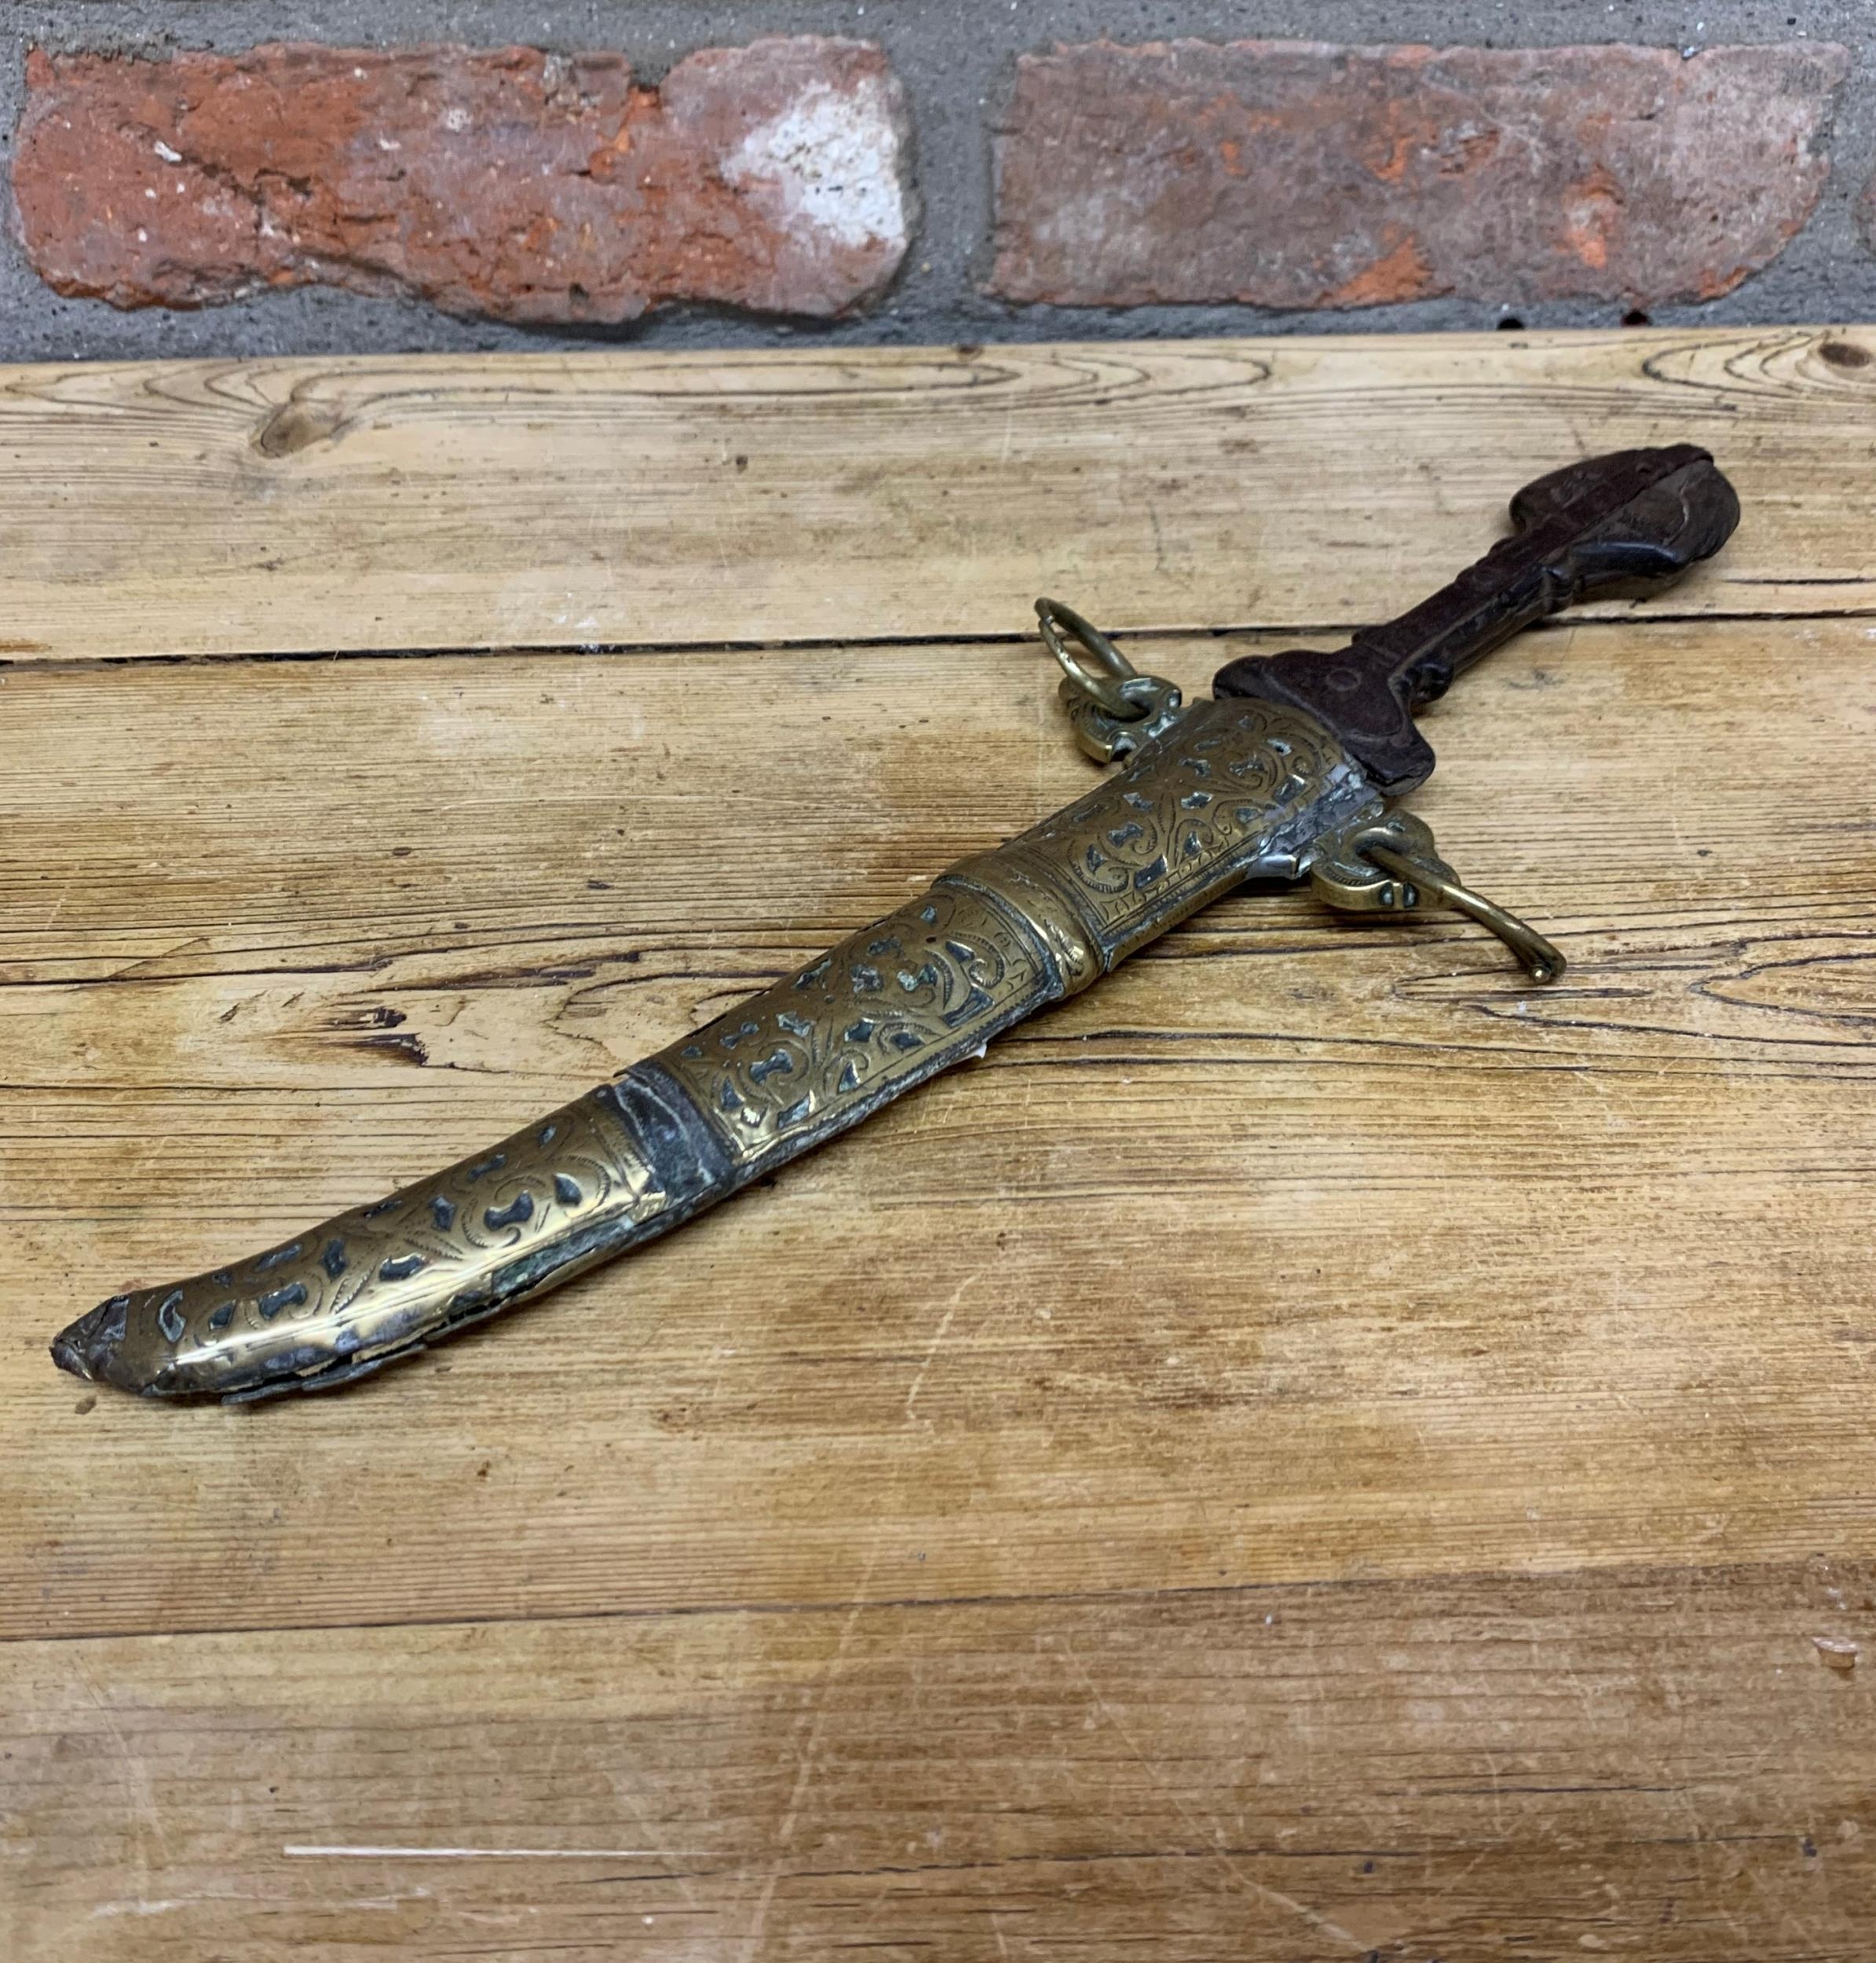 19th century Jambiya dagger with iron blade and carved wooden hilt, held in a decorative scrolled